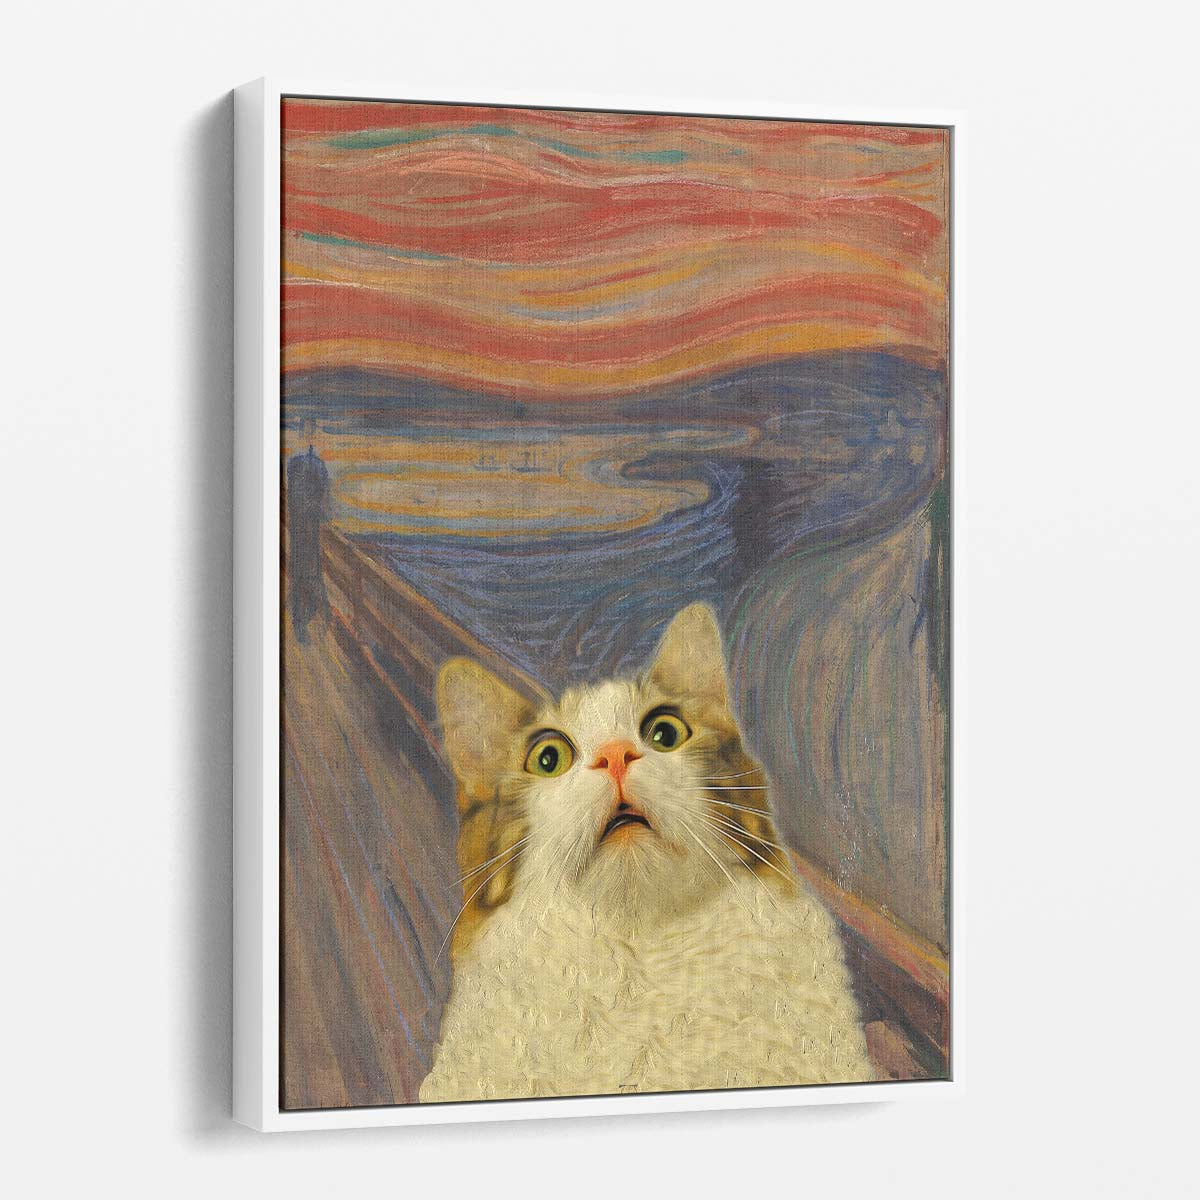 Funny Cat Scream Illustration, Memes-Inspired, Animal Portrait Wall Art by Luxuriance Designs, made in USA